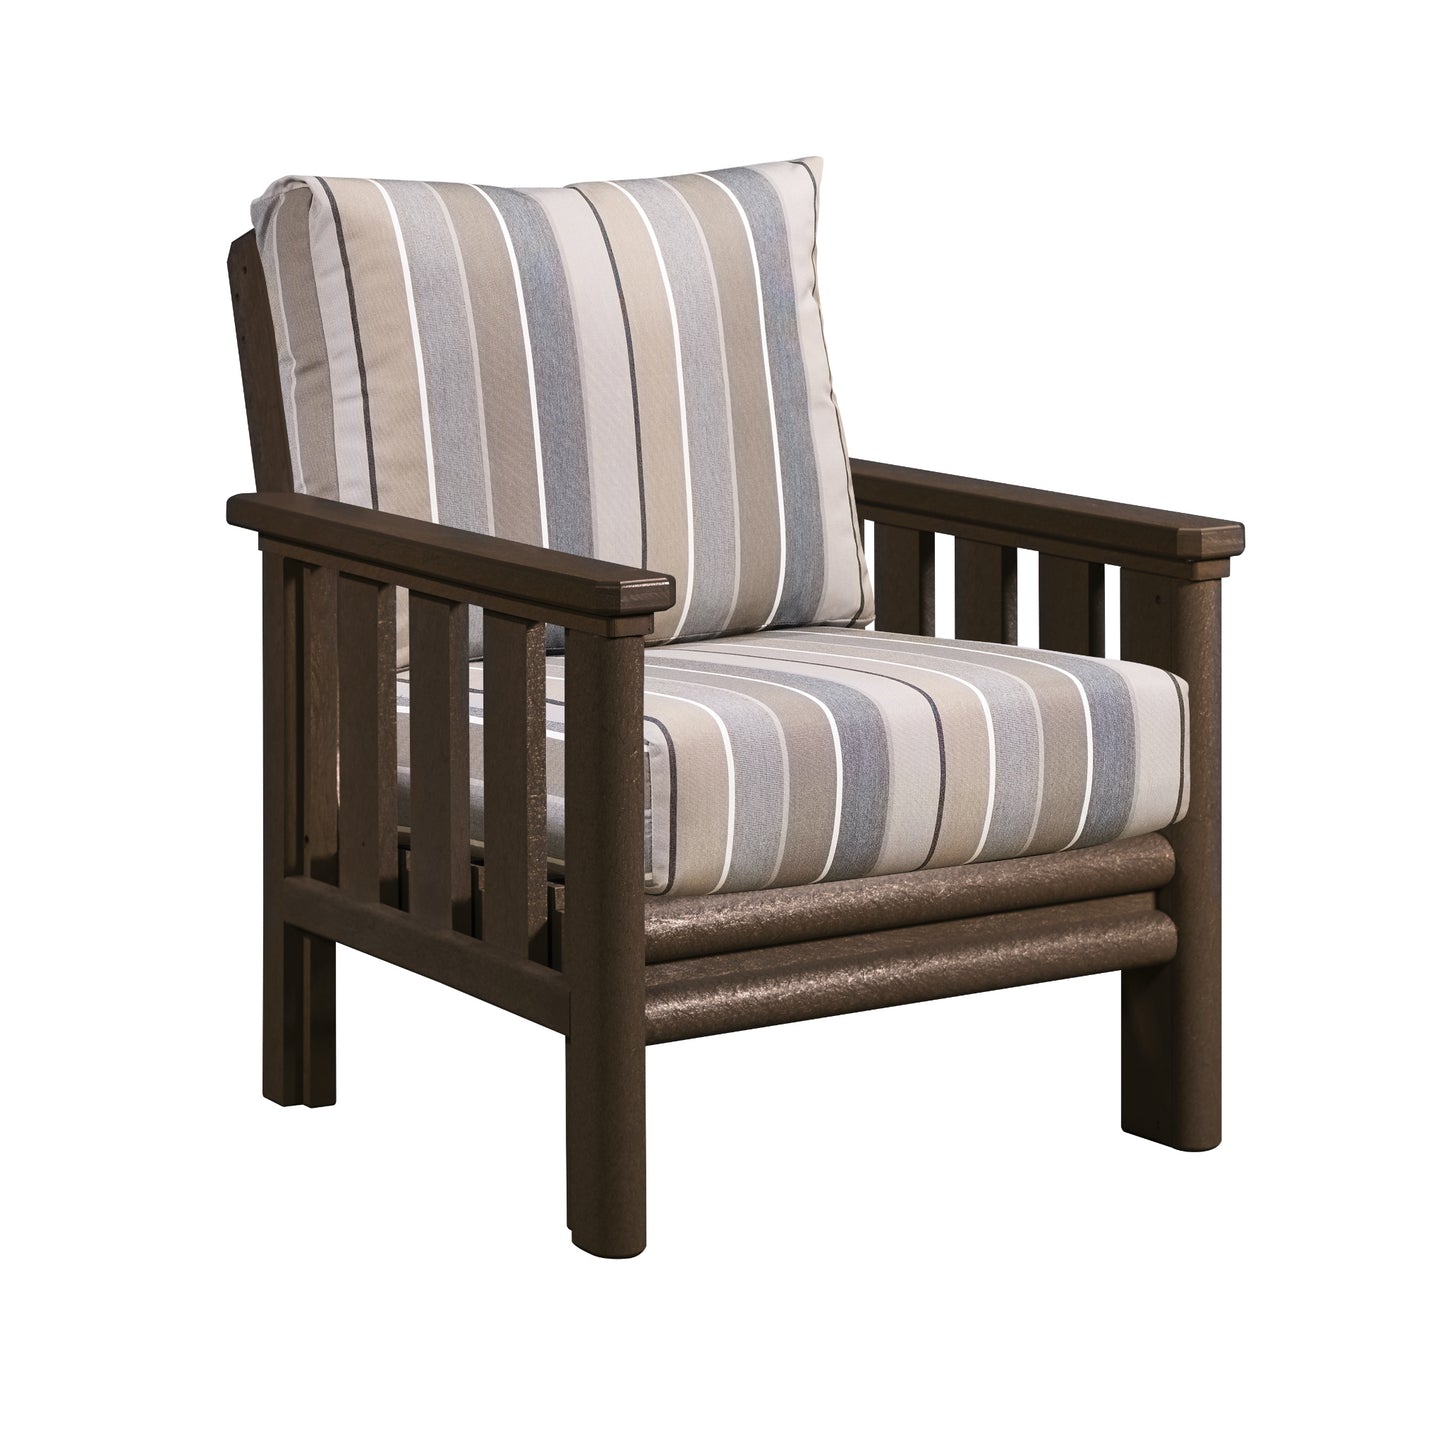 Stratford Arm Chair - CHOCOLATE FRAME WITH CUSHIONS - DSF261-16 [DSF141]